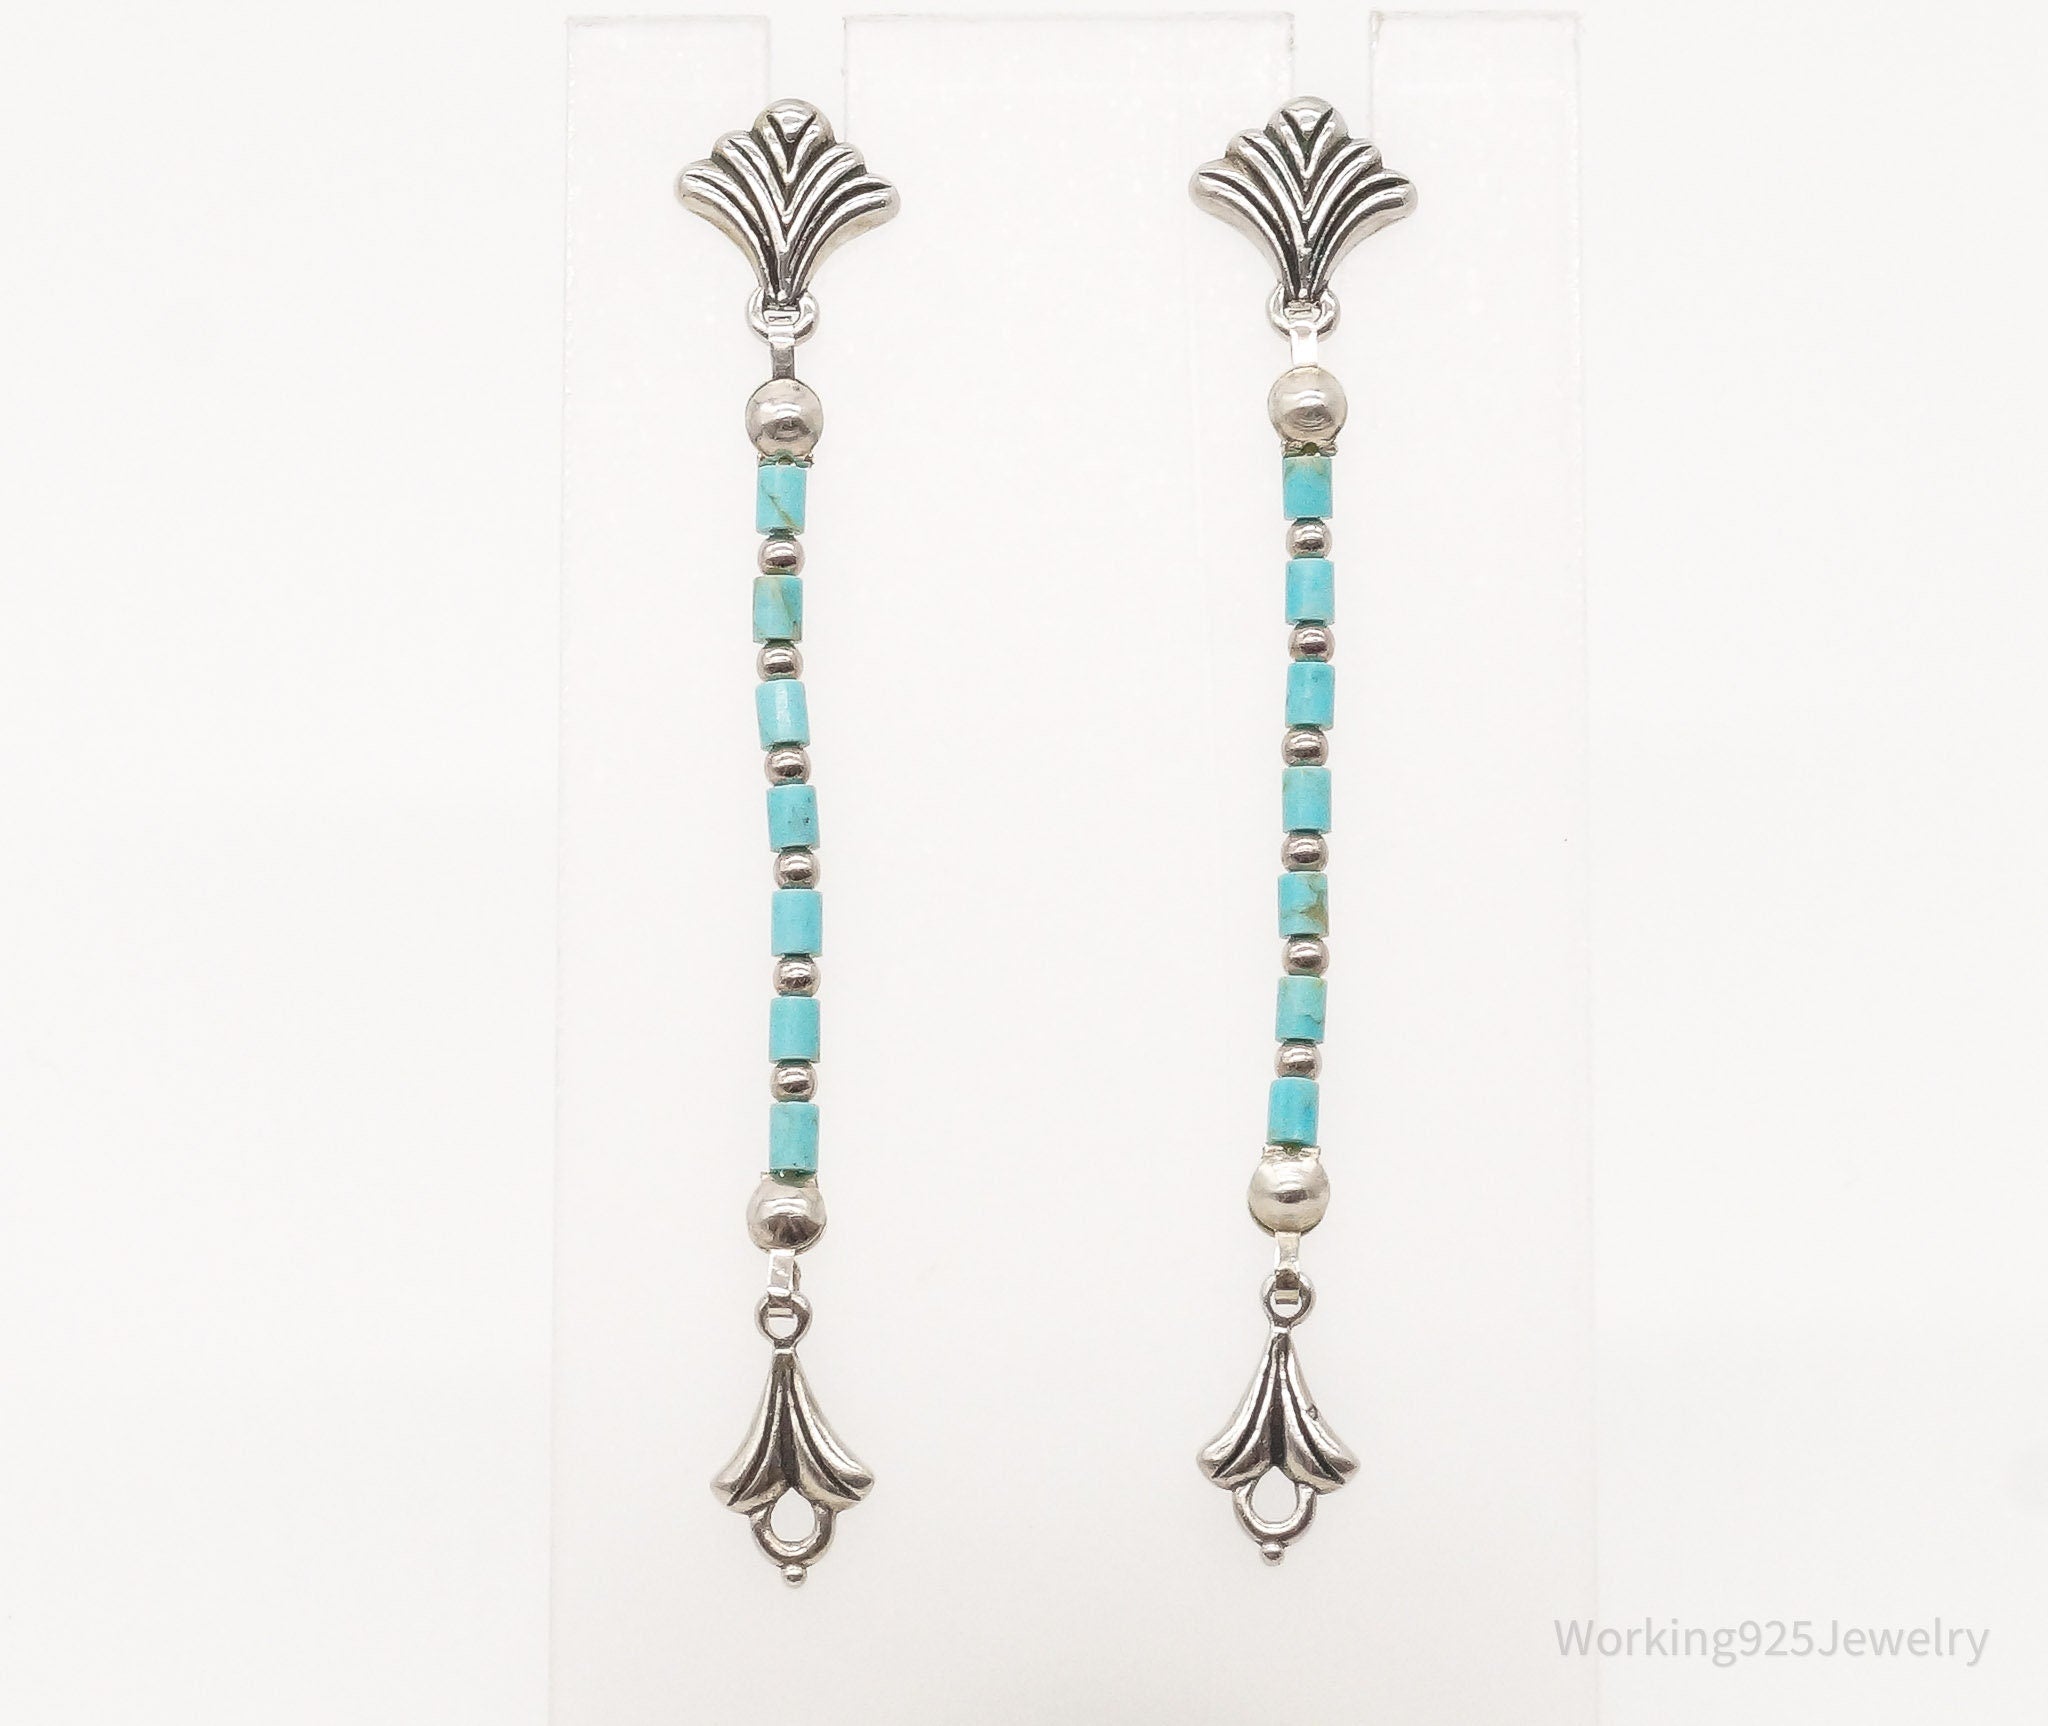 Western Designer Carolyn Pollack Relios Turquoise Sterling Silver Earrings